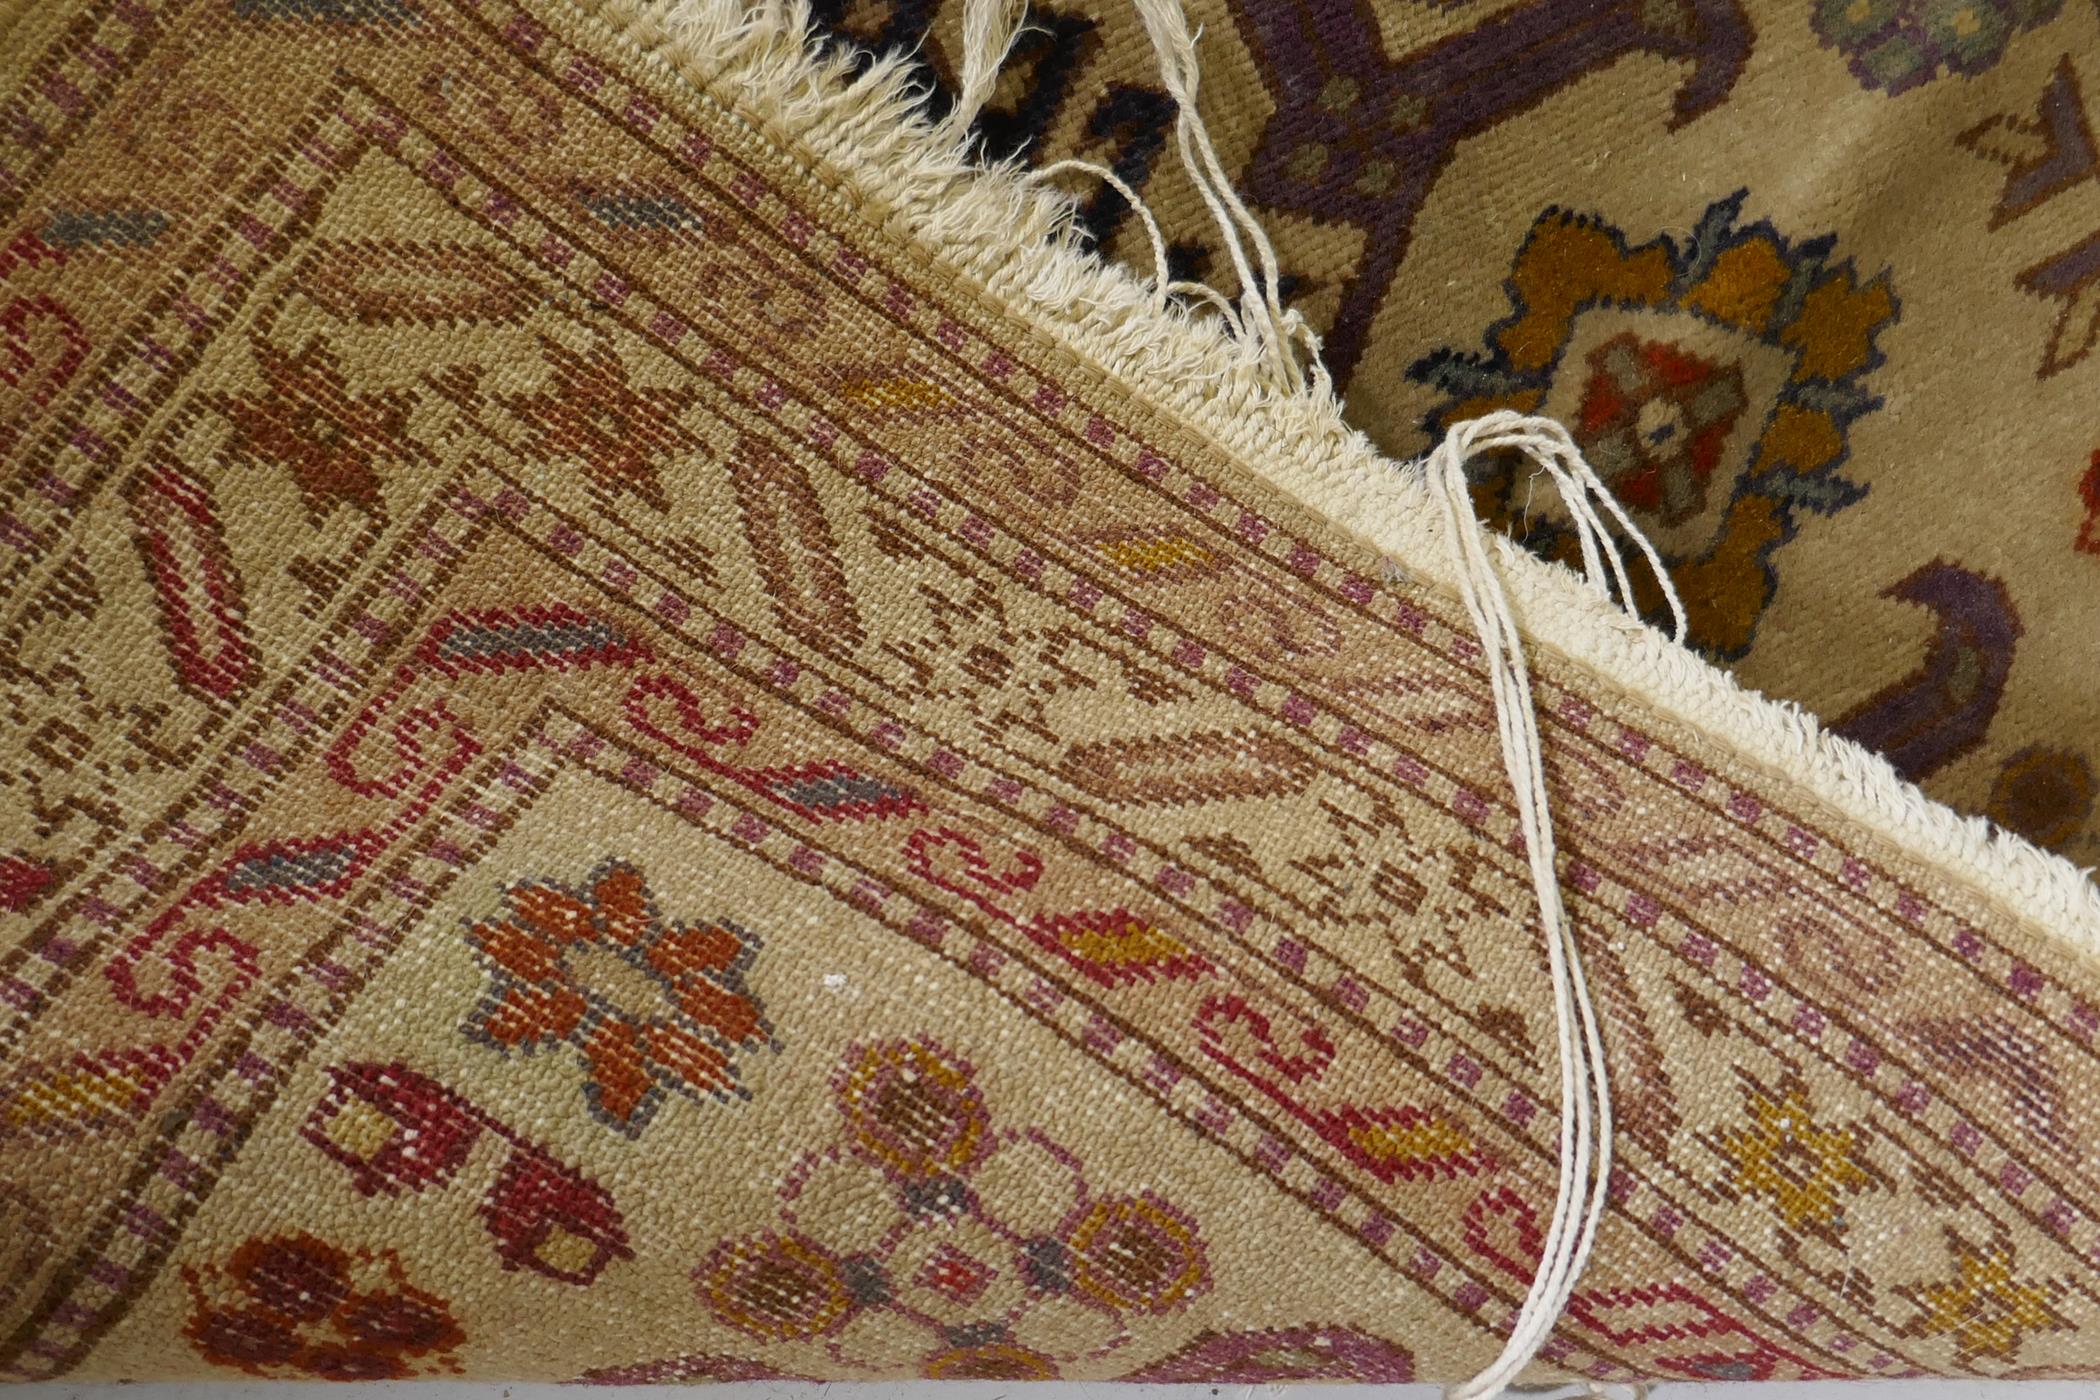 An antique hand woven Oriental rug with geometric designs n a buff coloured field, 68 x 125cm - Image 3 of 3